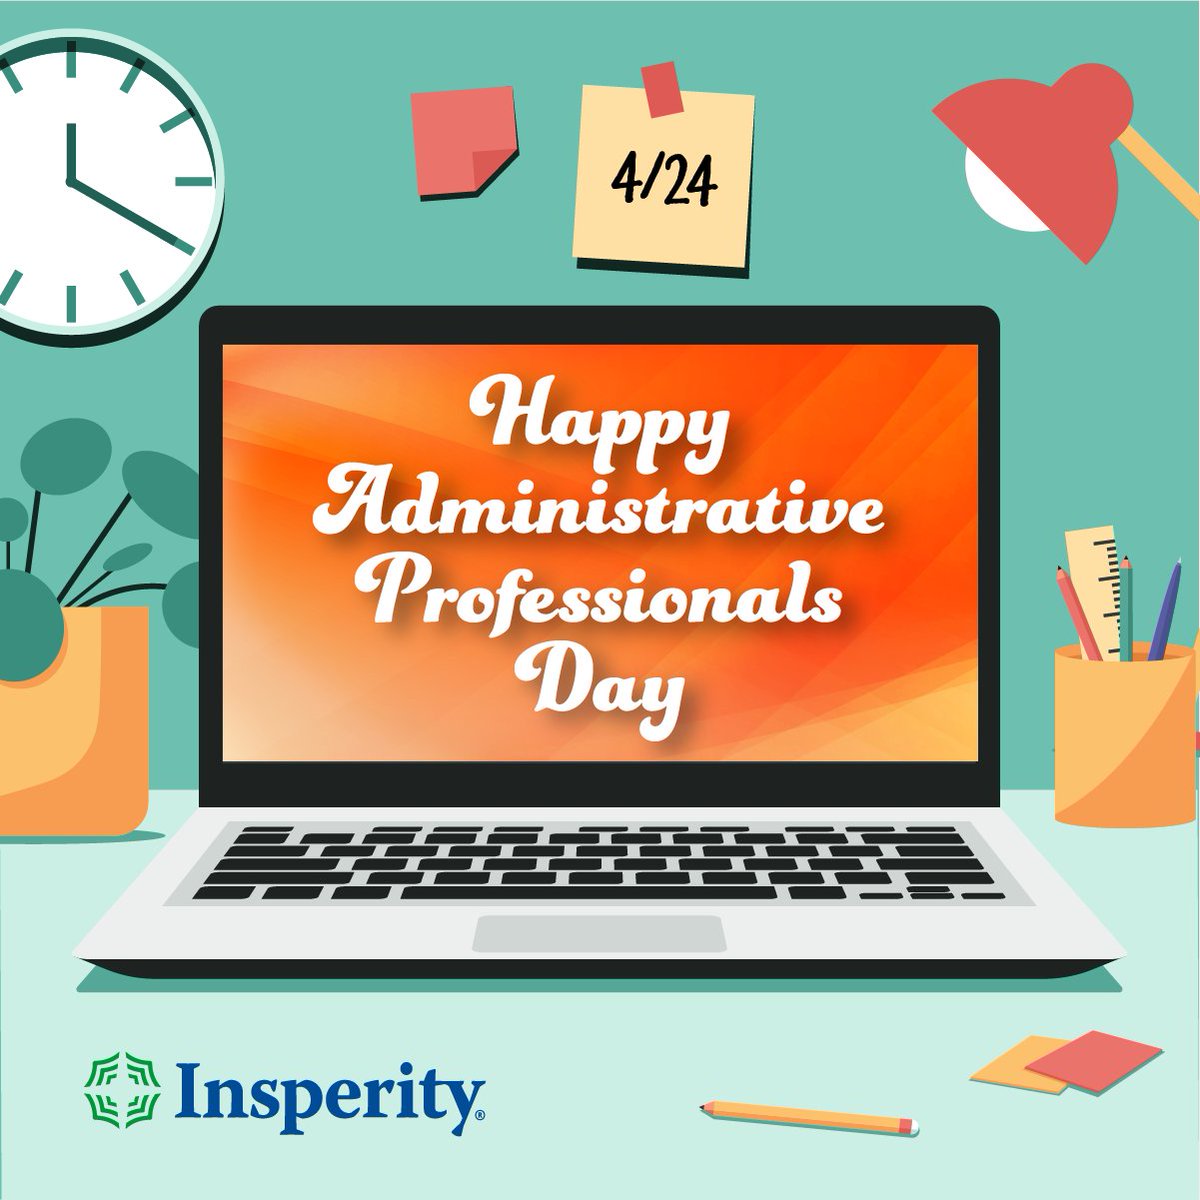 Celebrating the backbone of our success: our amazing administrative professionals! Your hard work, expertise, & unstoppable attitude keep the wheels of our organization turning. Thank you for making a difference every day. 👩‍💼👨‍💼✨ #AdministrativeProfessionalsDay #Insperity